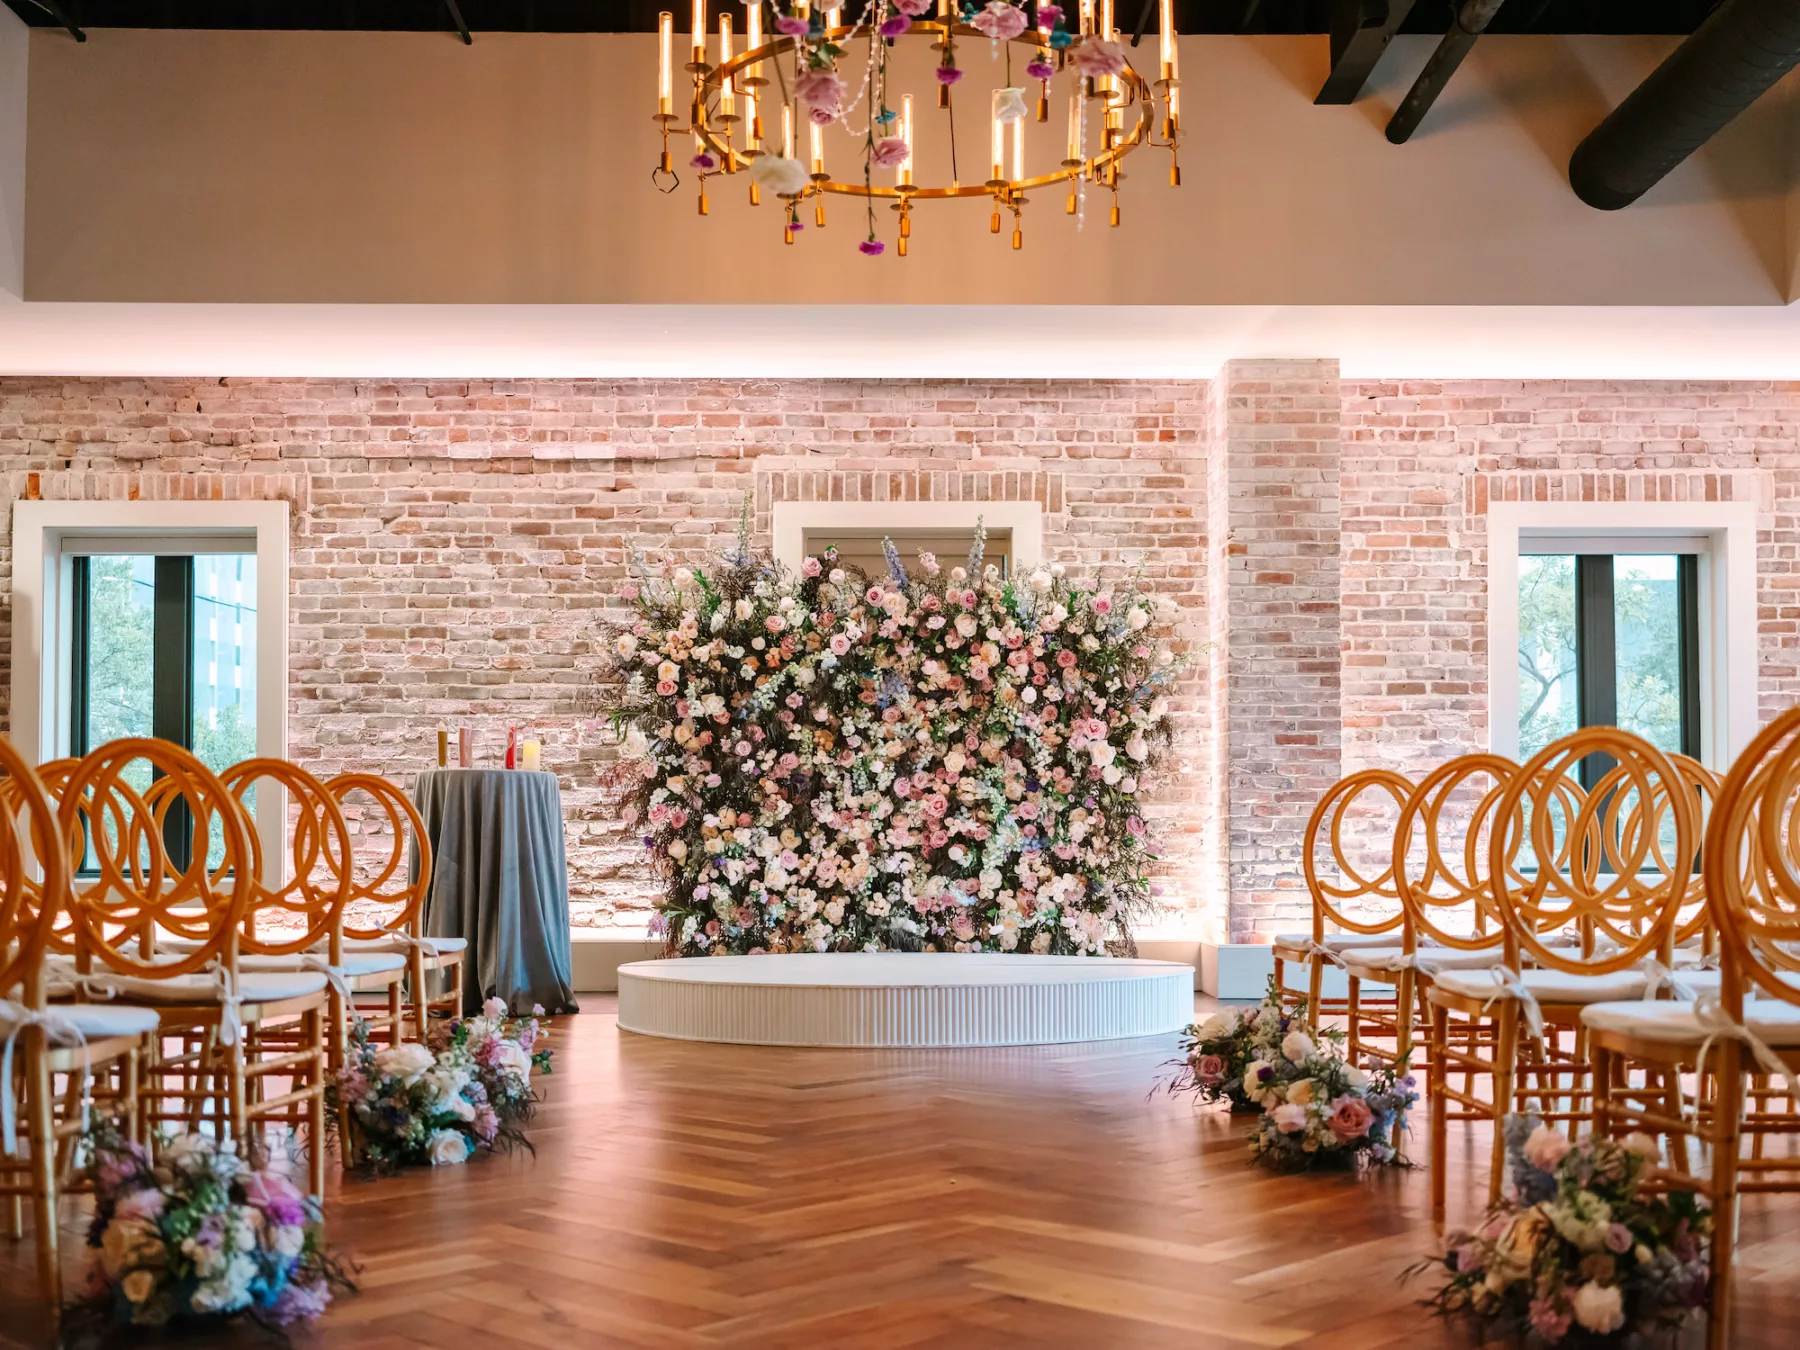 Whimcial Pink and Blue Wedding Ceremony Ideas | Pink Roses, White Hydrangeas, Blue Stock Flowers, and Greenery Backdrop Inspiration | Downtown St. Pete Venue Red Mesa Events | Planner Wilder Mind Events